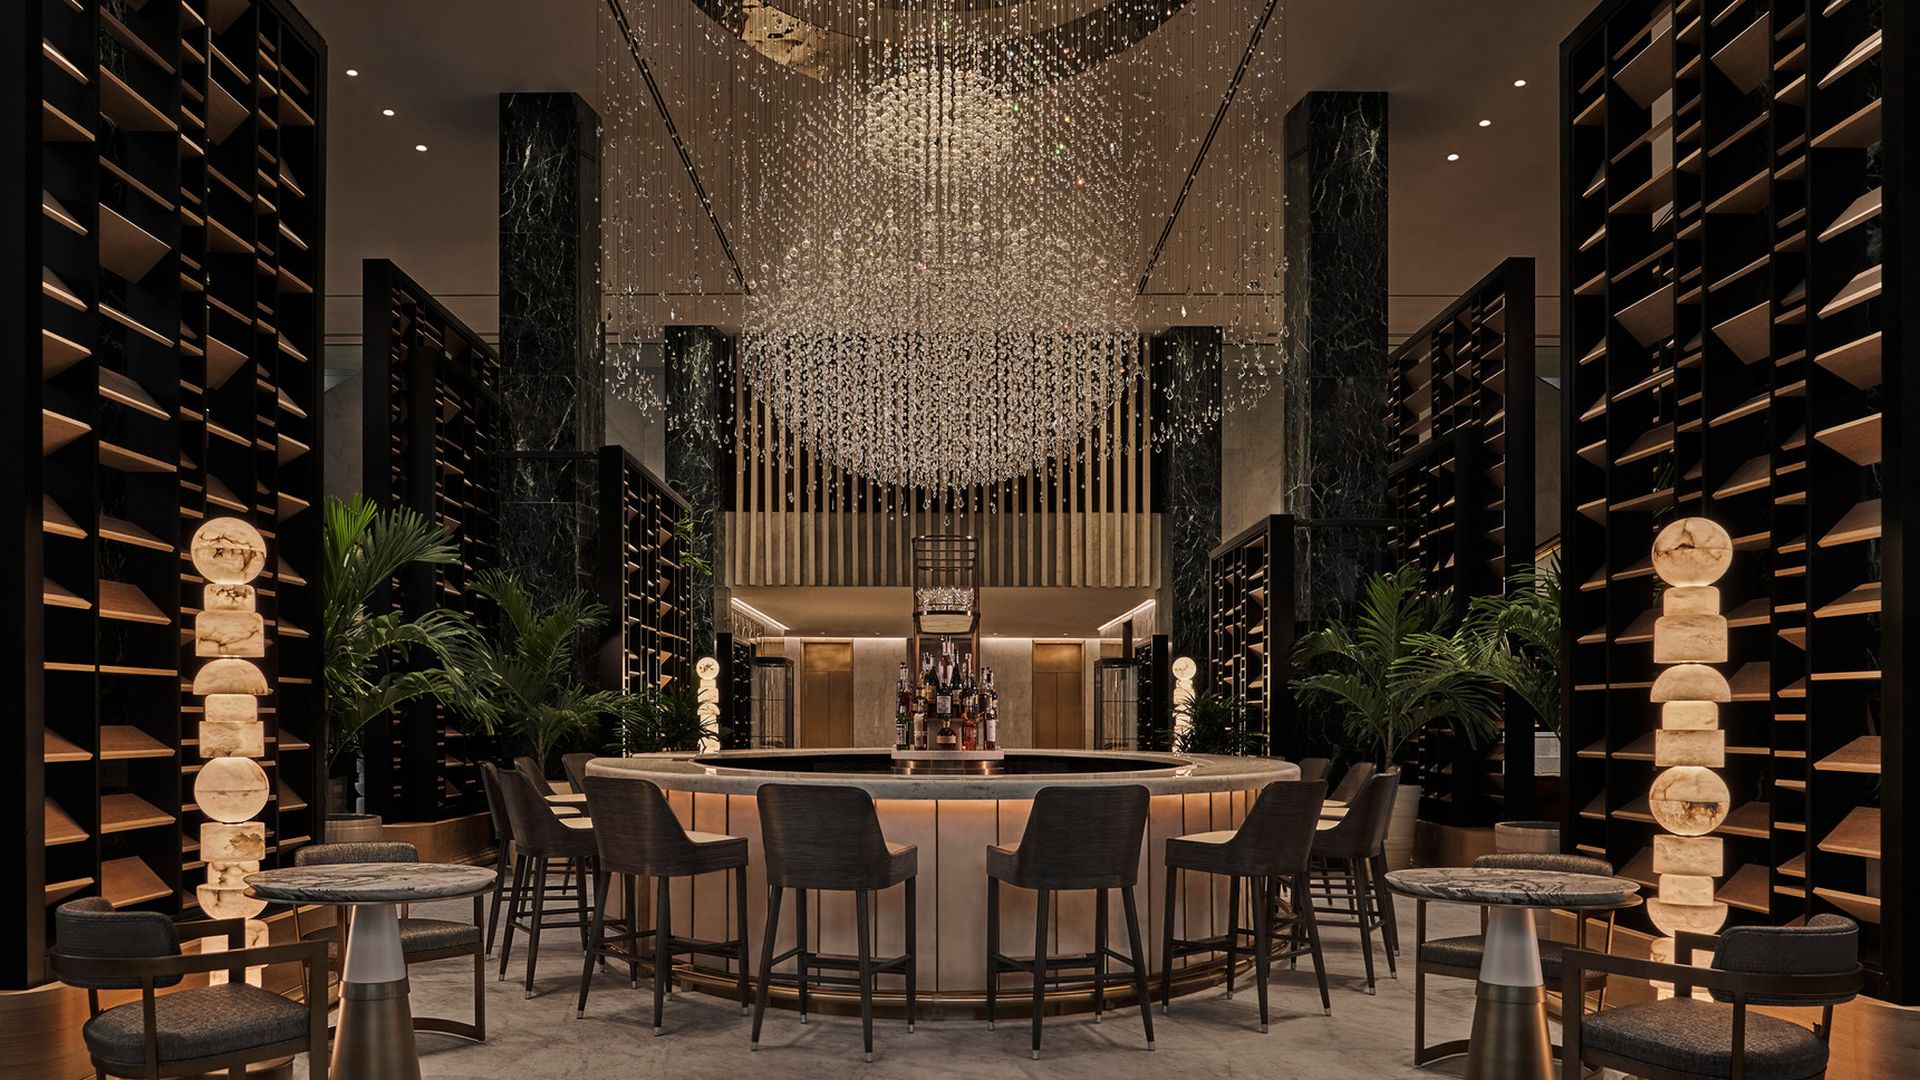 image of a circular bar with 6 seats around it and a stunning chandelier overhead at the Chandelier Bar in New Orleans